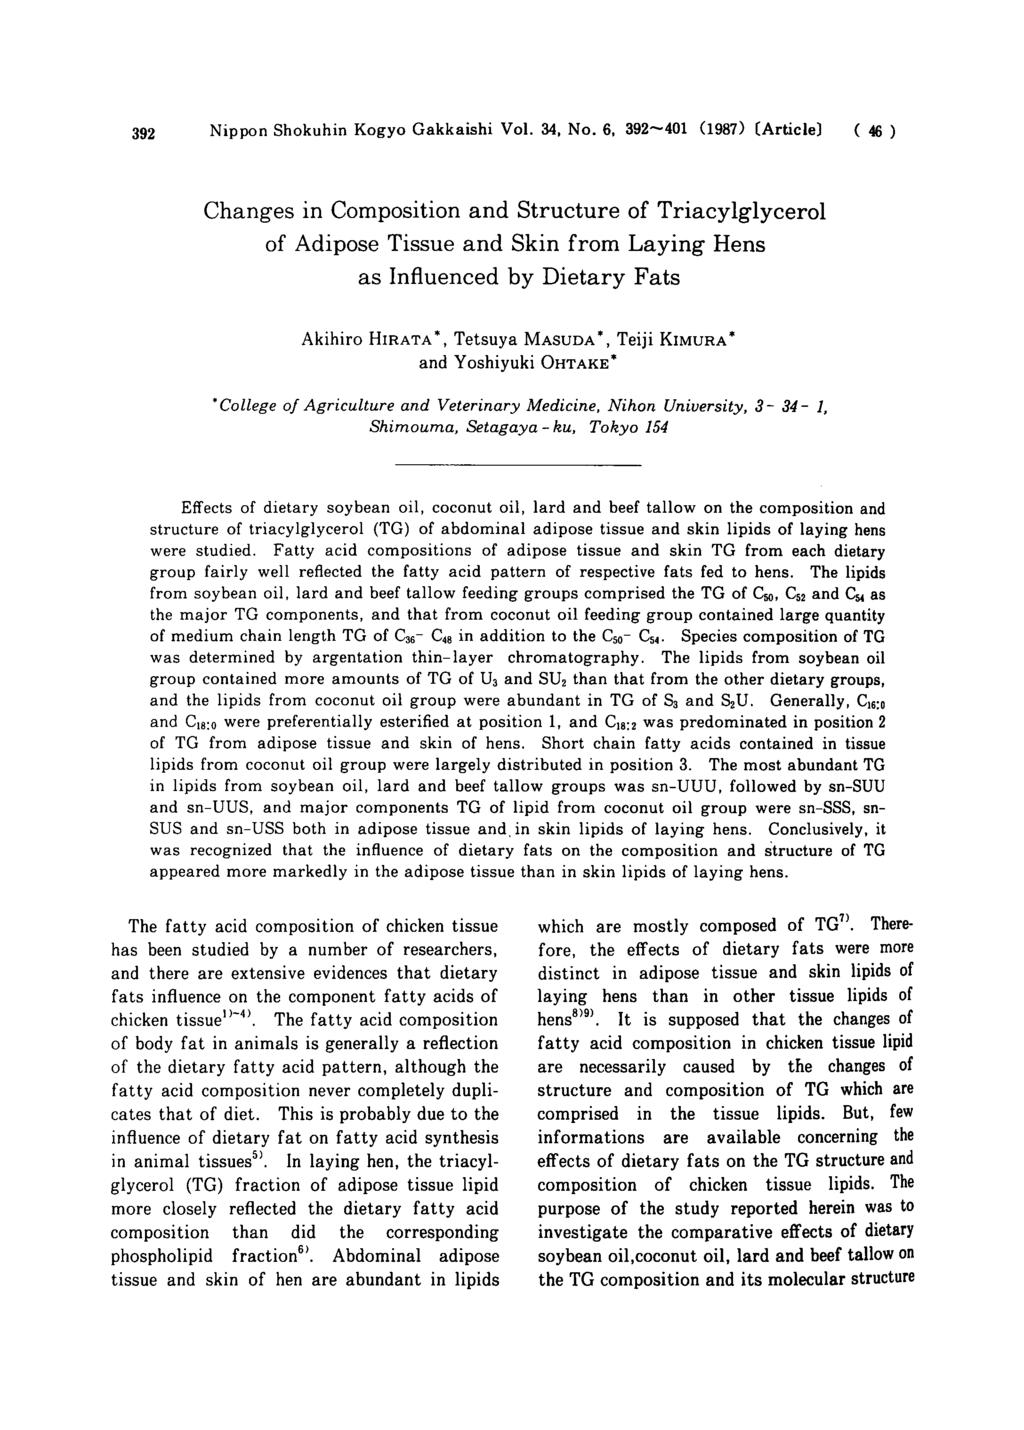 Changes in Composition and Structure of Triacylglycerol of Adipose Tissue and Skin from Laying Hens as Influenced by Dietary Fats Akihiro HIRATA*, Tetsuya MASUDA*, Teiji KIMURA* and Yoshiyuki OHTAKE*